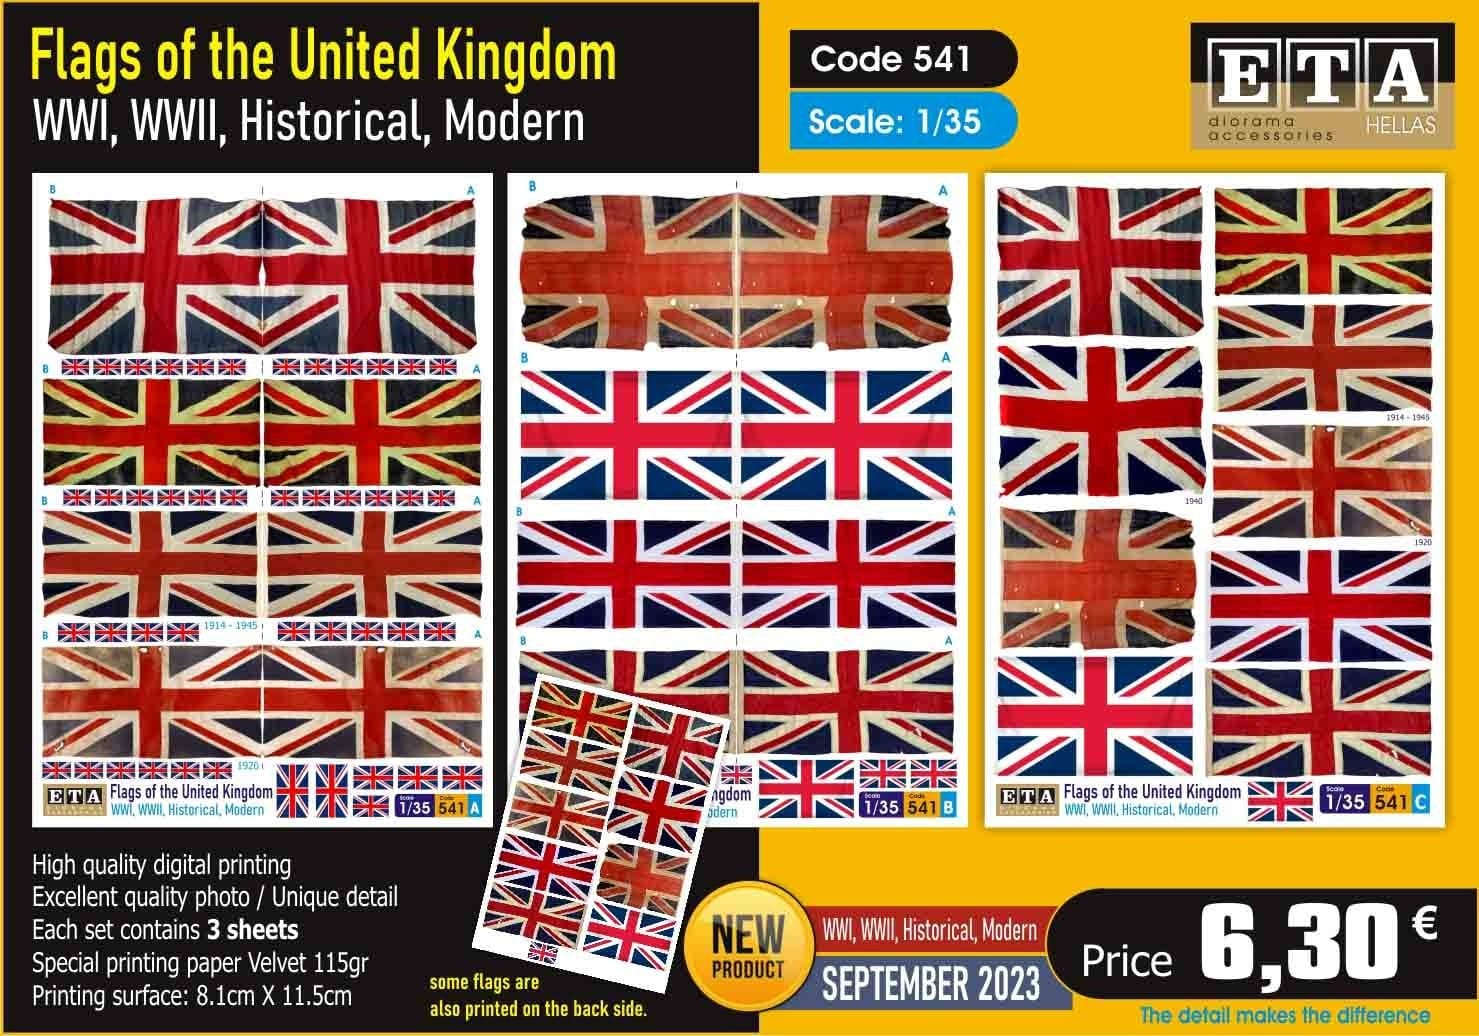 ETA Diorama Releases New 1-35 Scale Maps and Flags of the United Kingdom